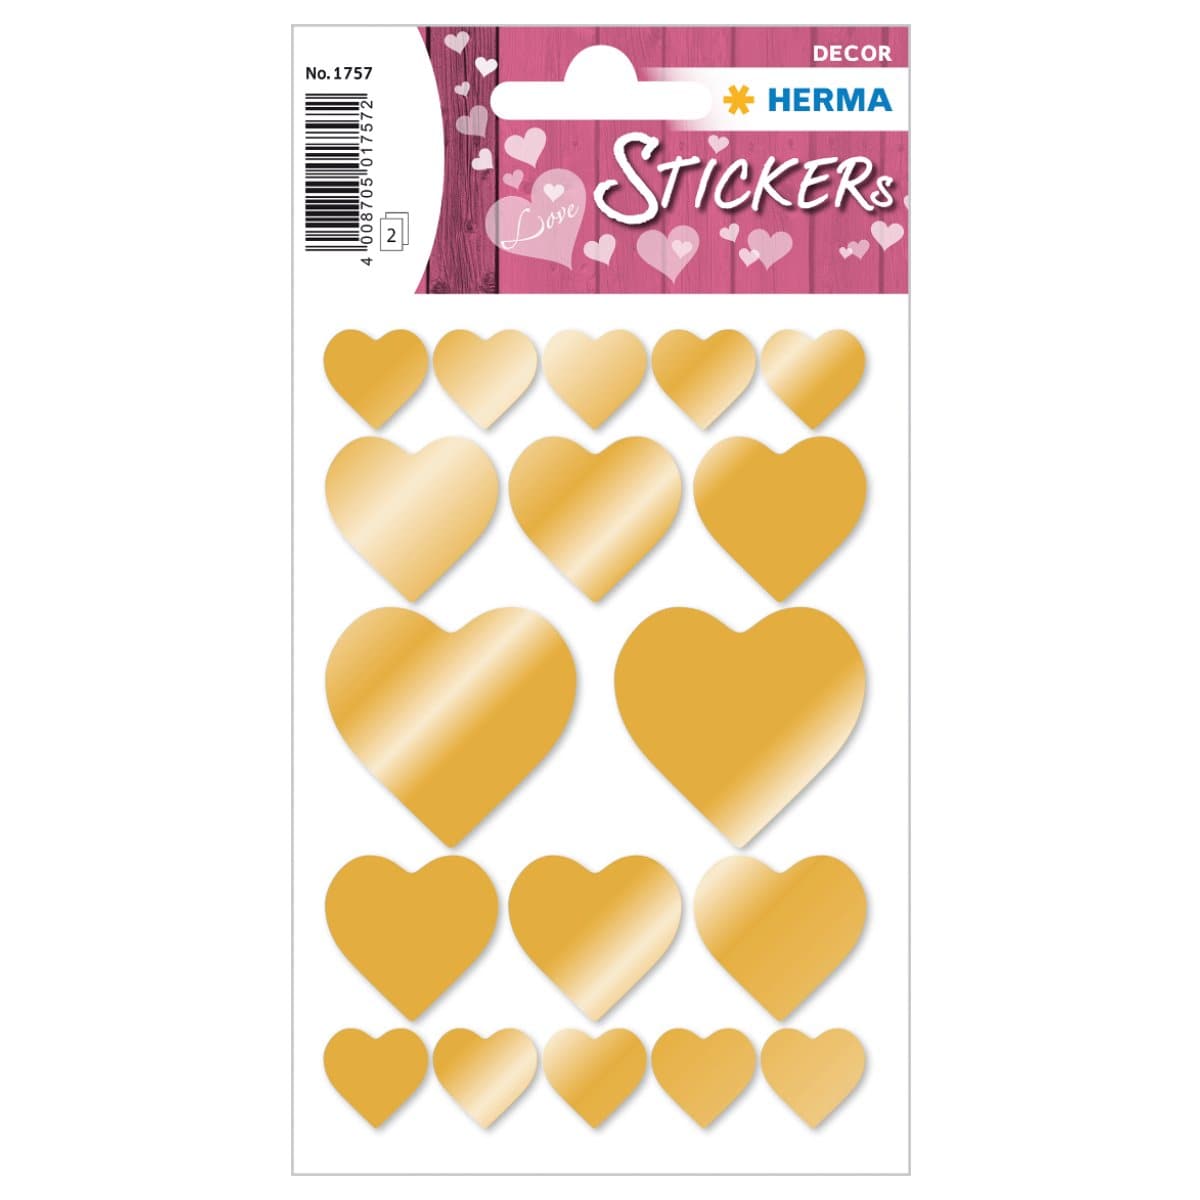 Herma Decor Stickers HEARTS, 2 sheets/pack, Gold